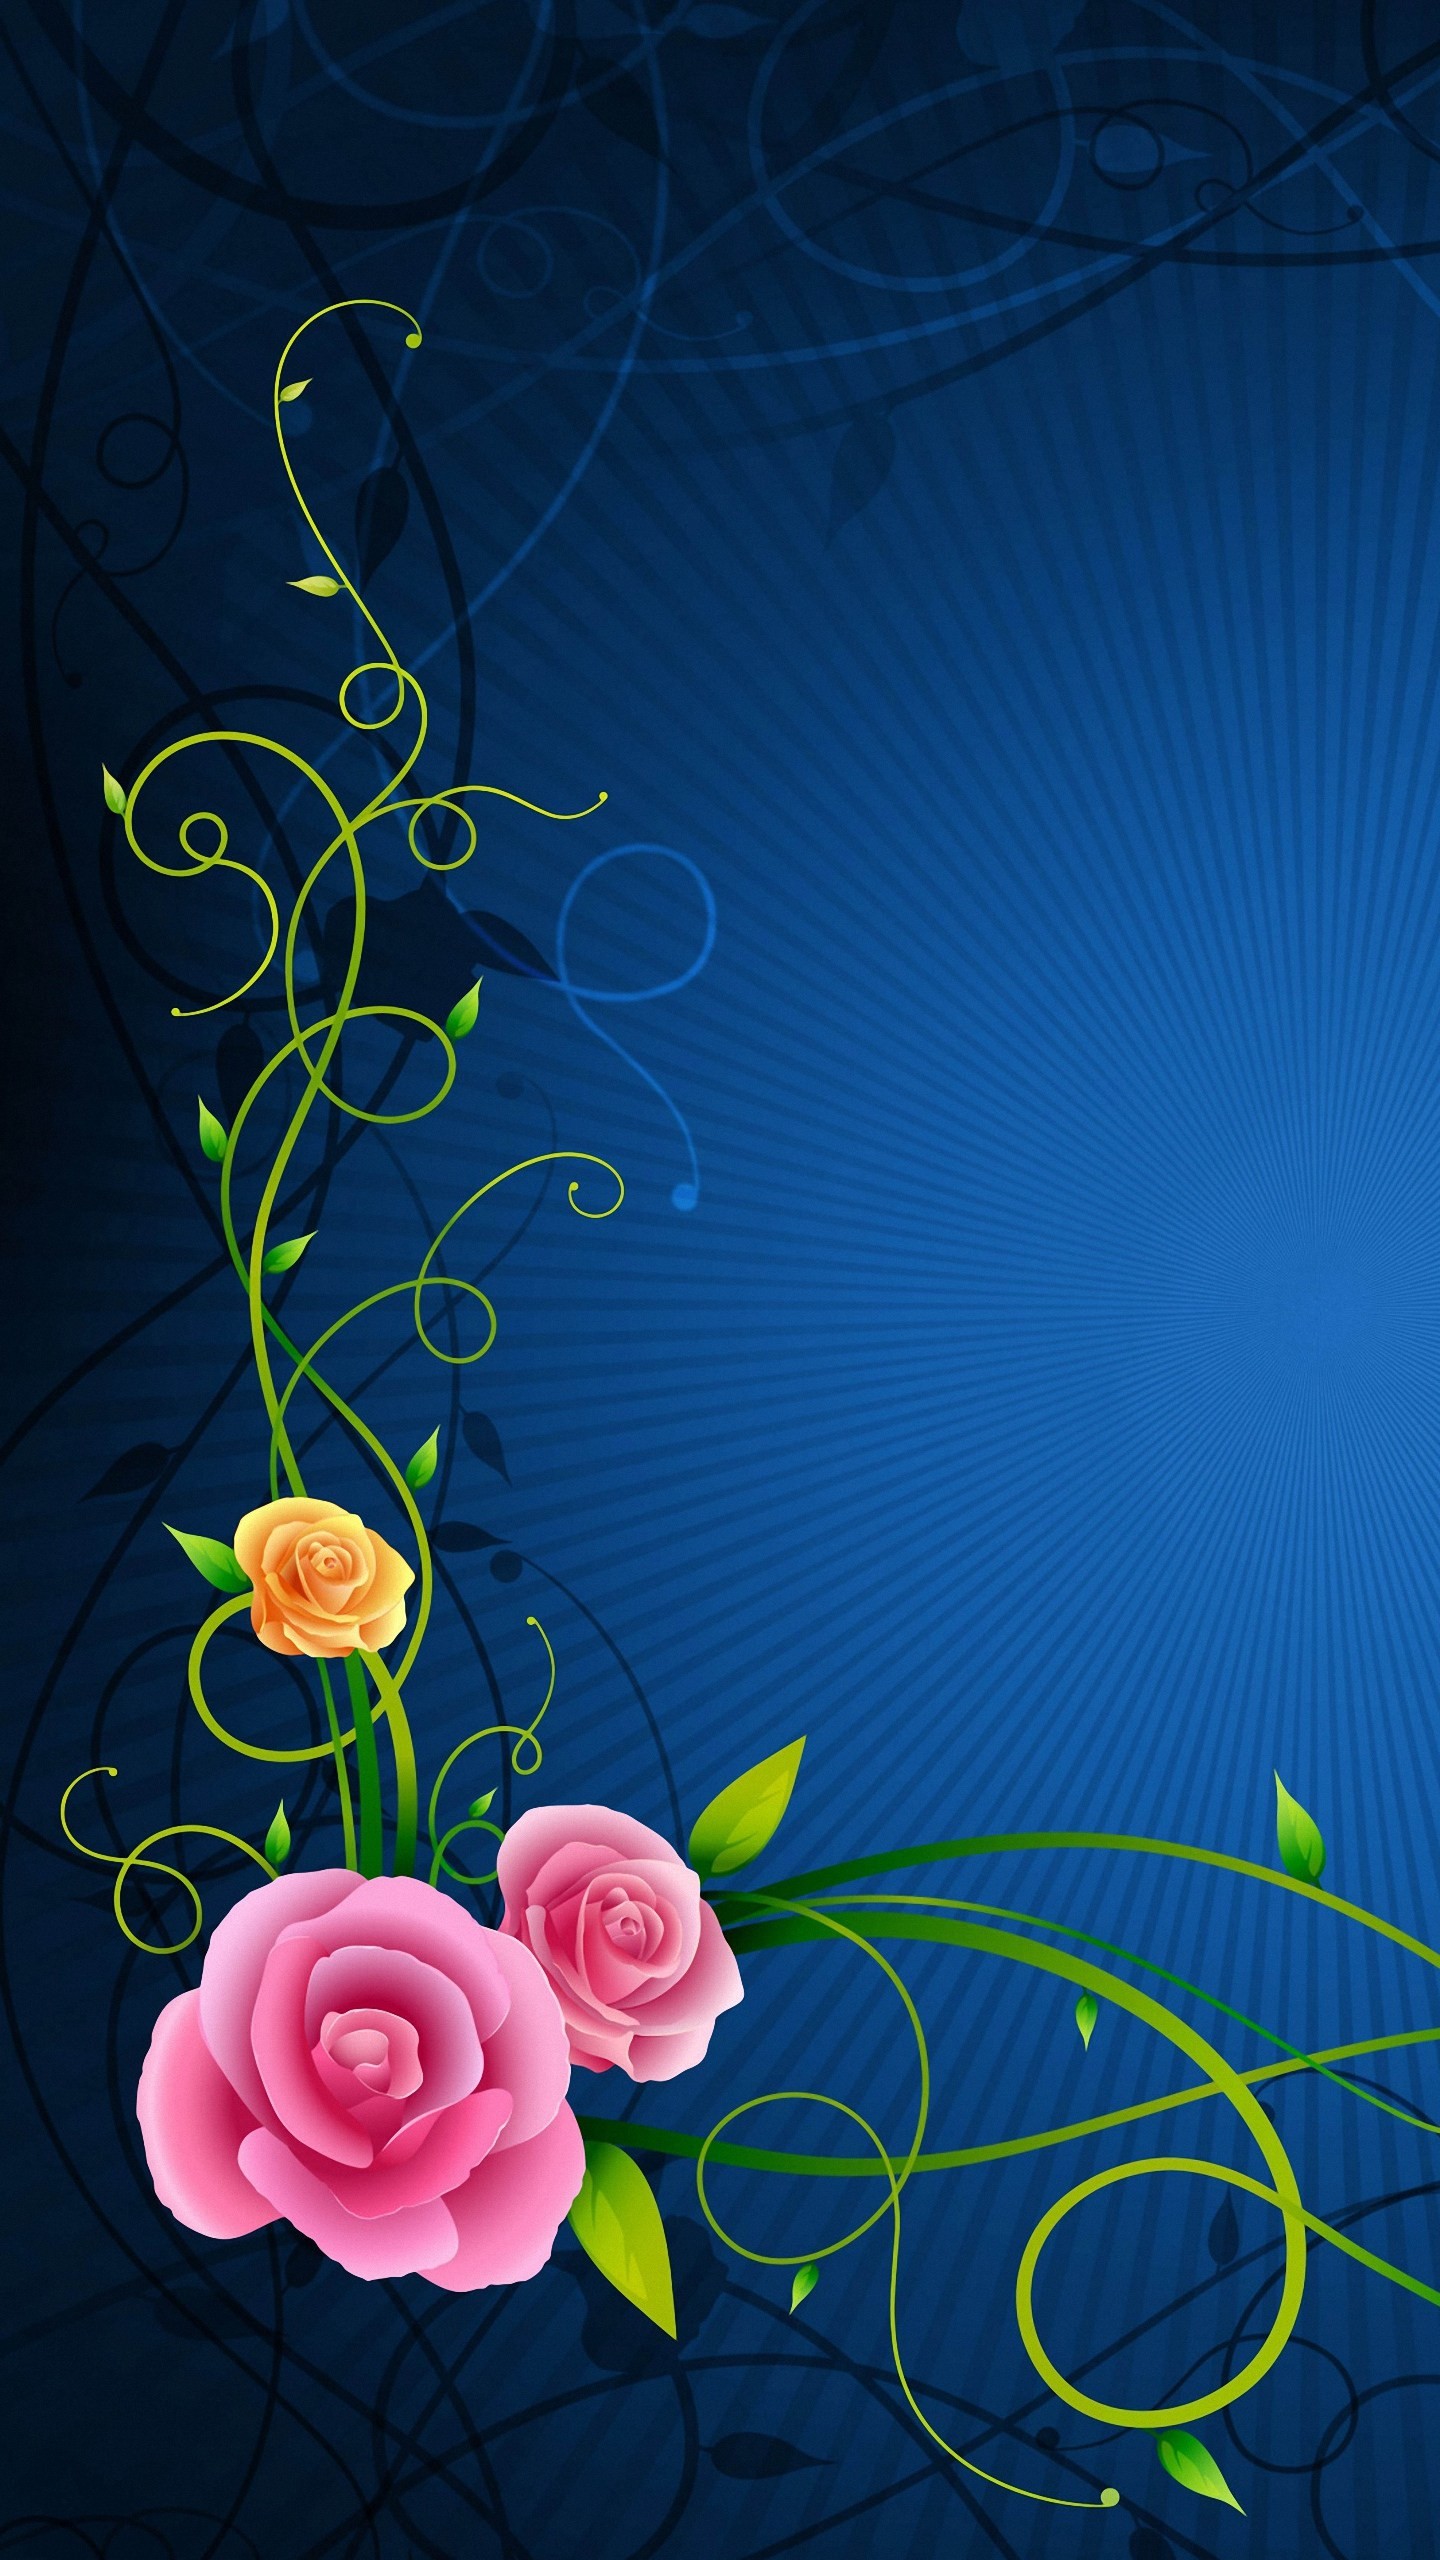 Flowers Lines Patterns Hd Wallpapers For Android Mobile - Monday Blessing  Good Morning - 1440x2560 Wallpaper 